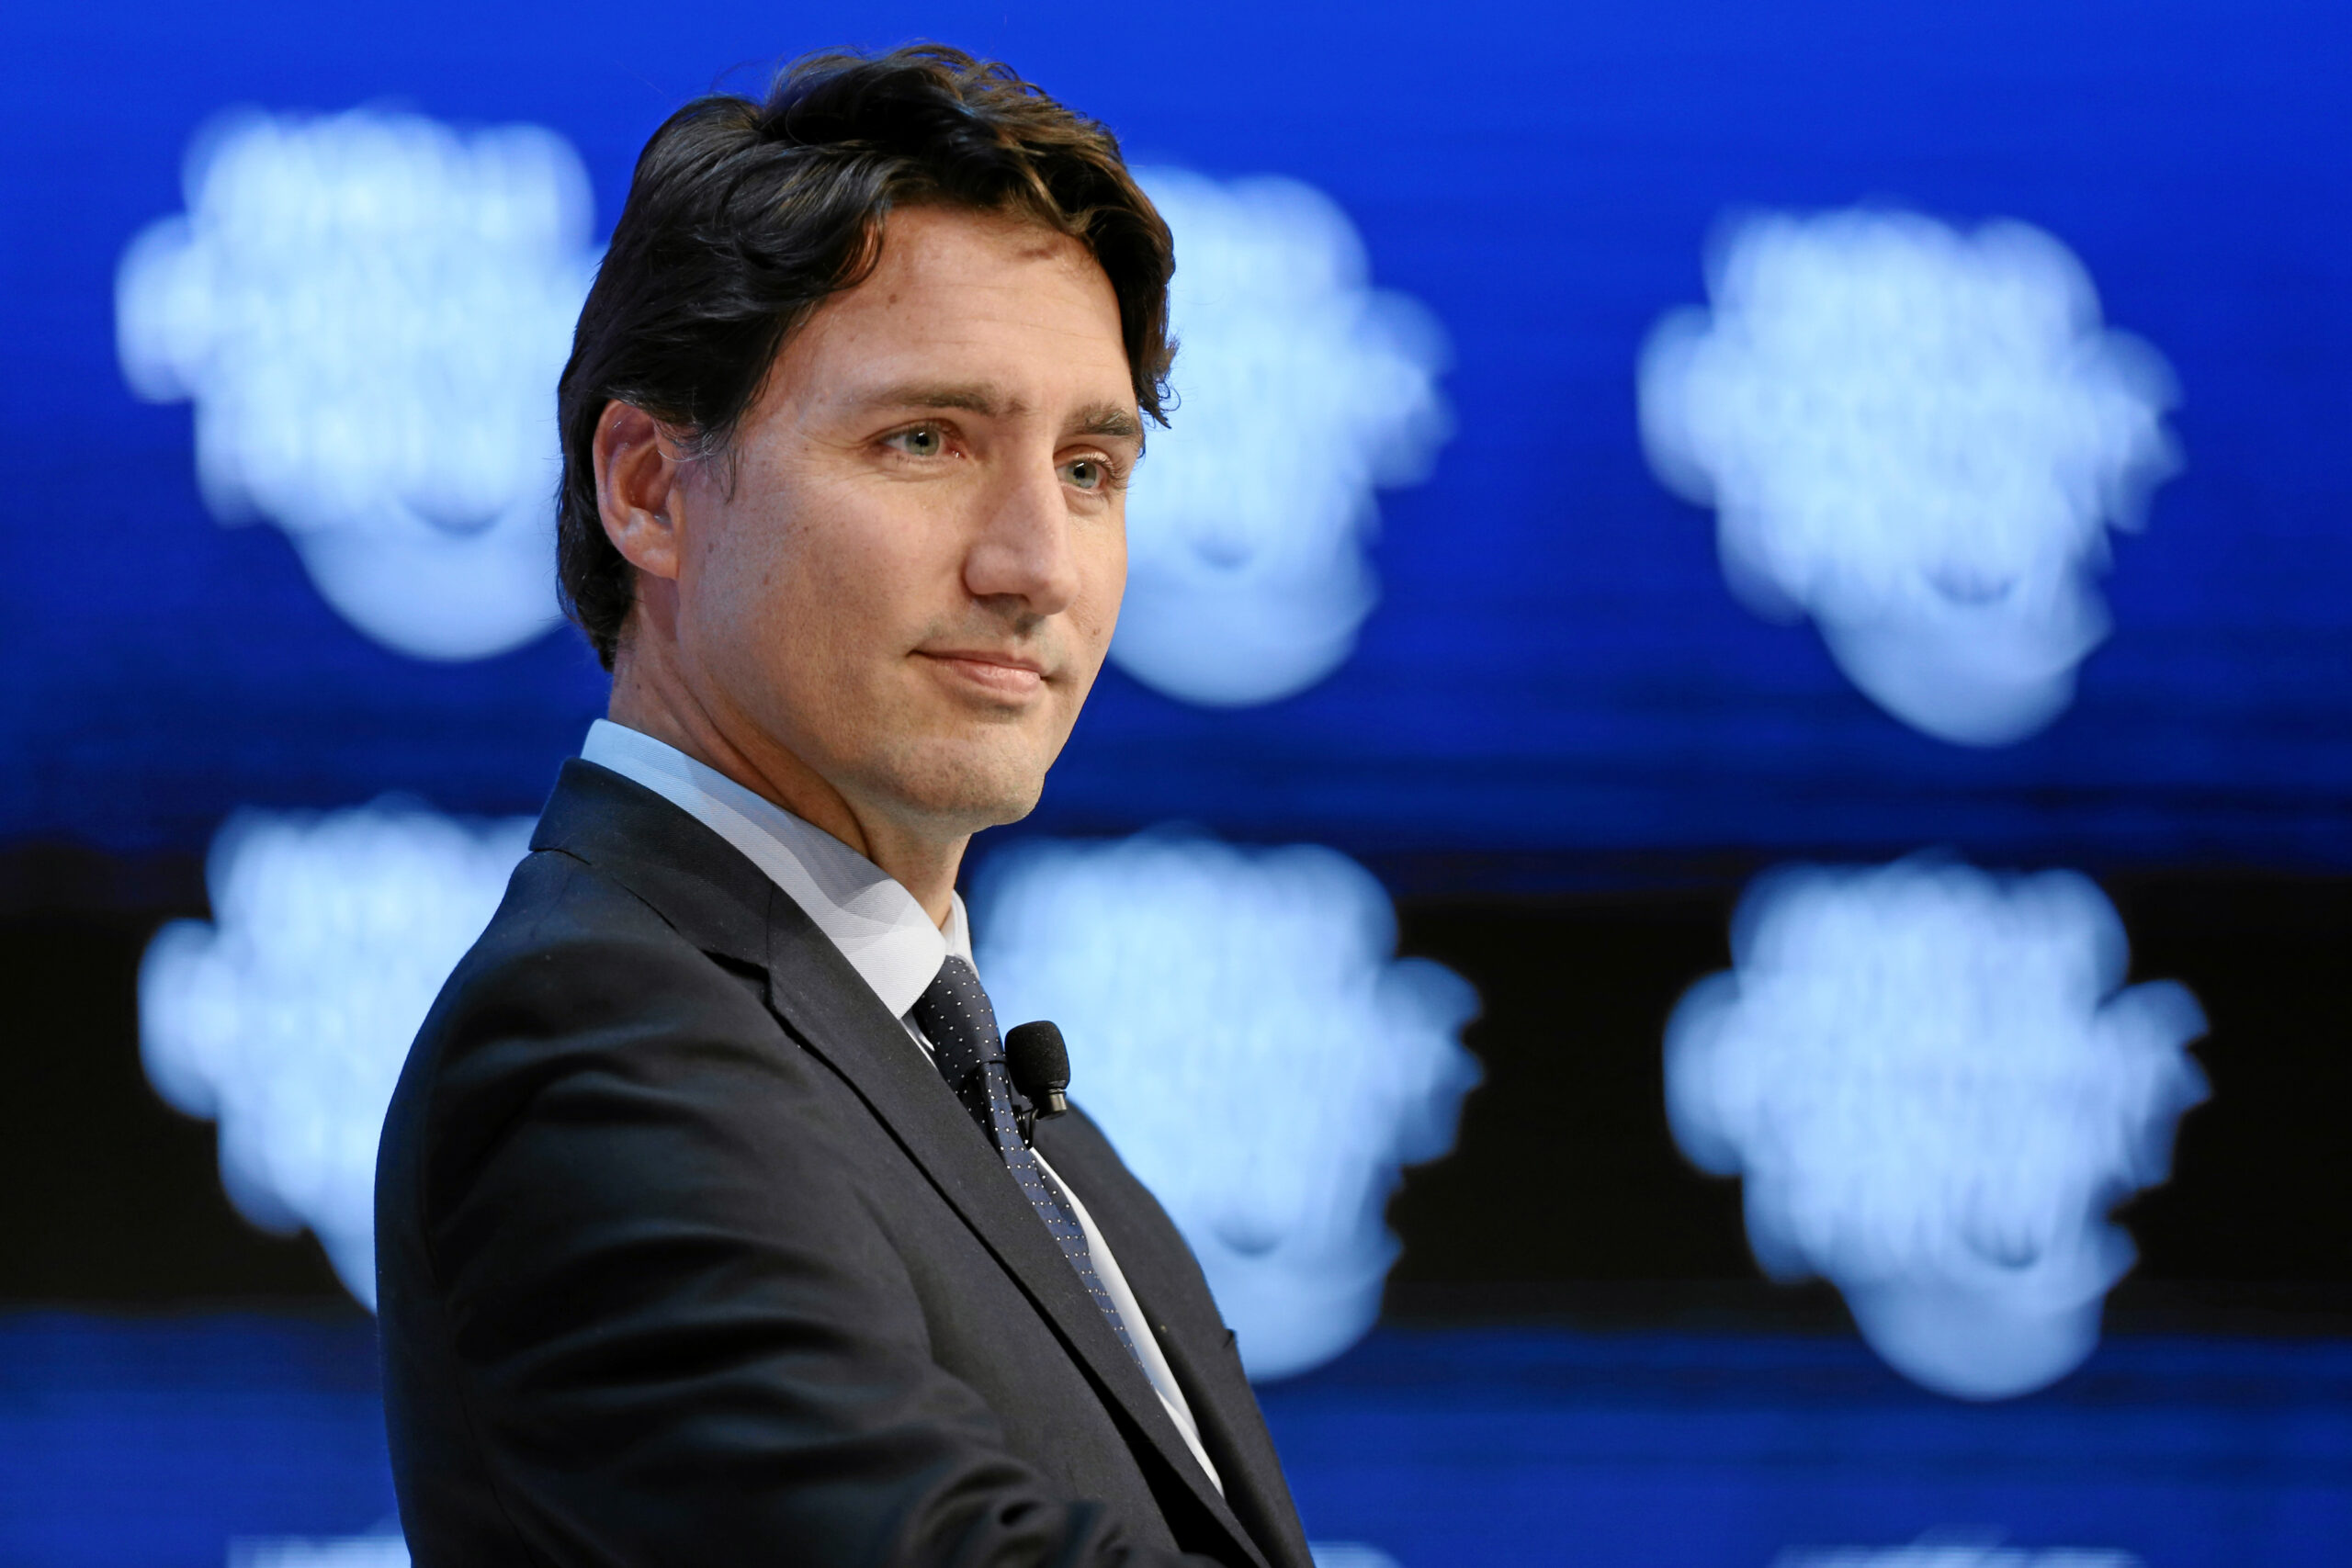 The Canadian Opportunity: Justin Trudeau